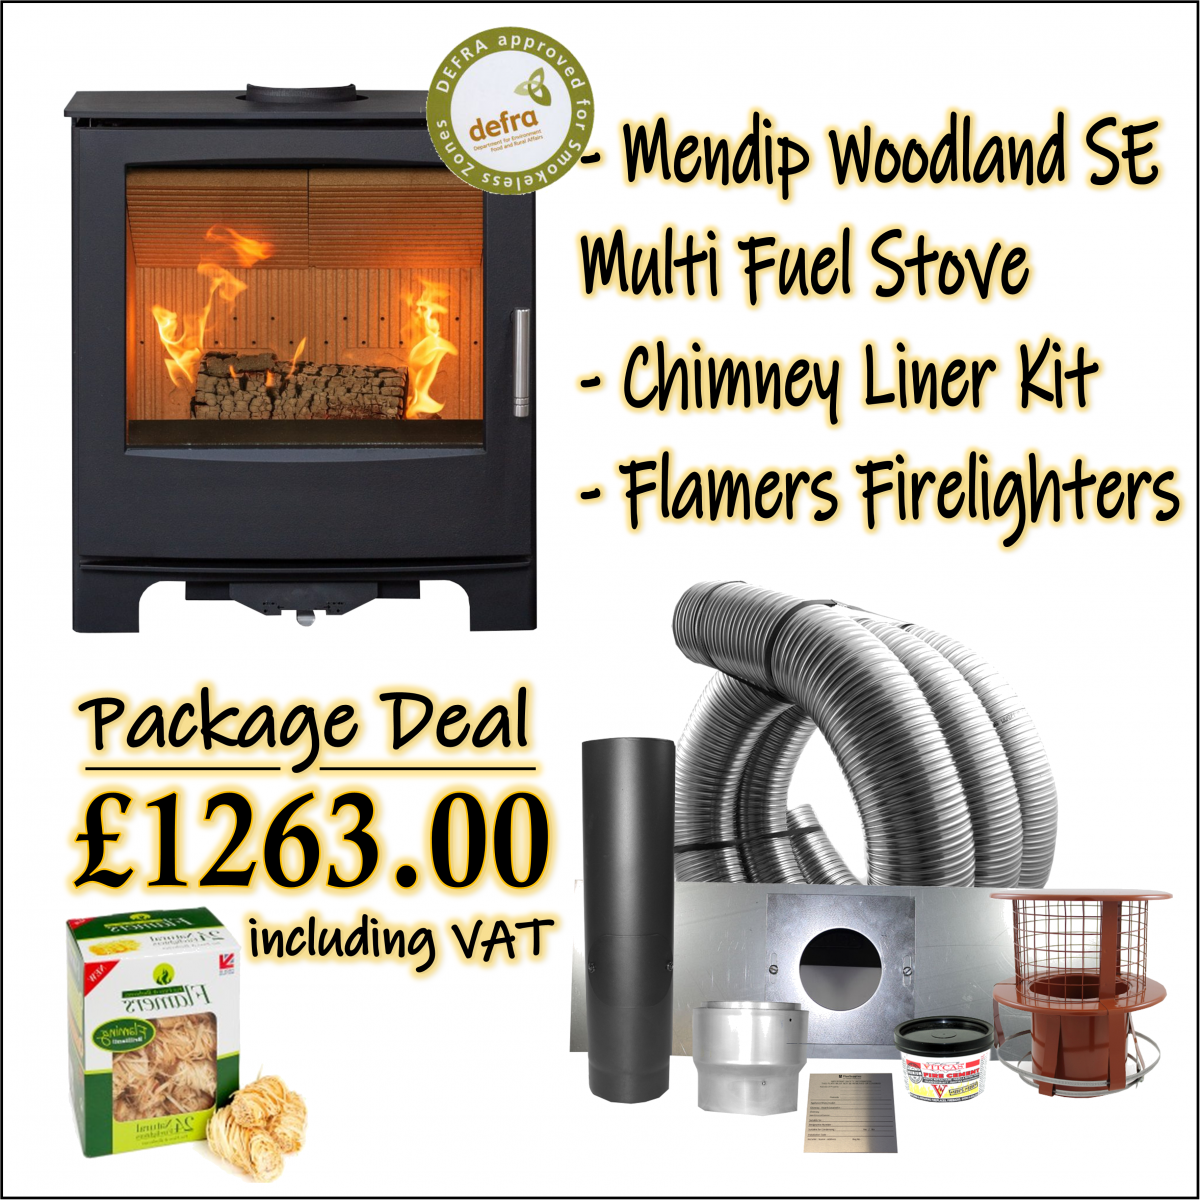 Mendip Woodland Stove Package Deal